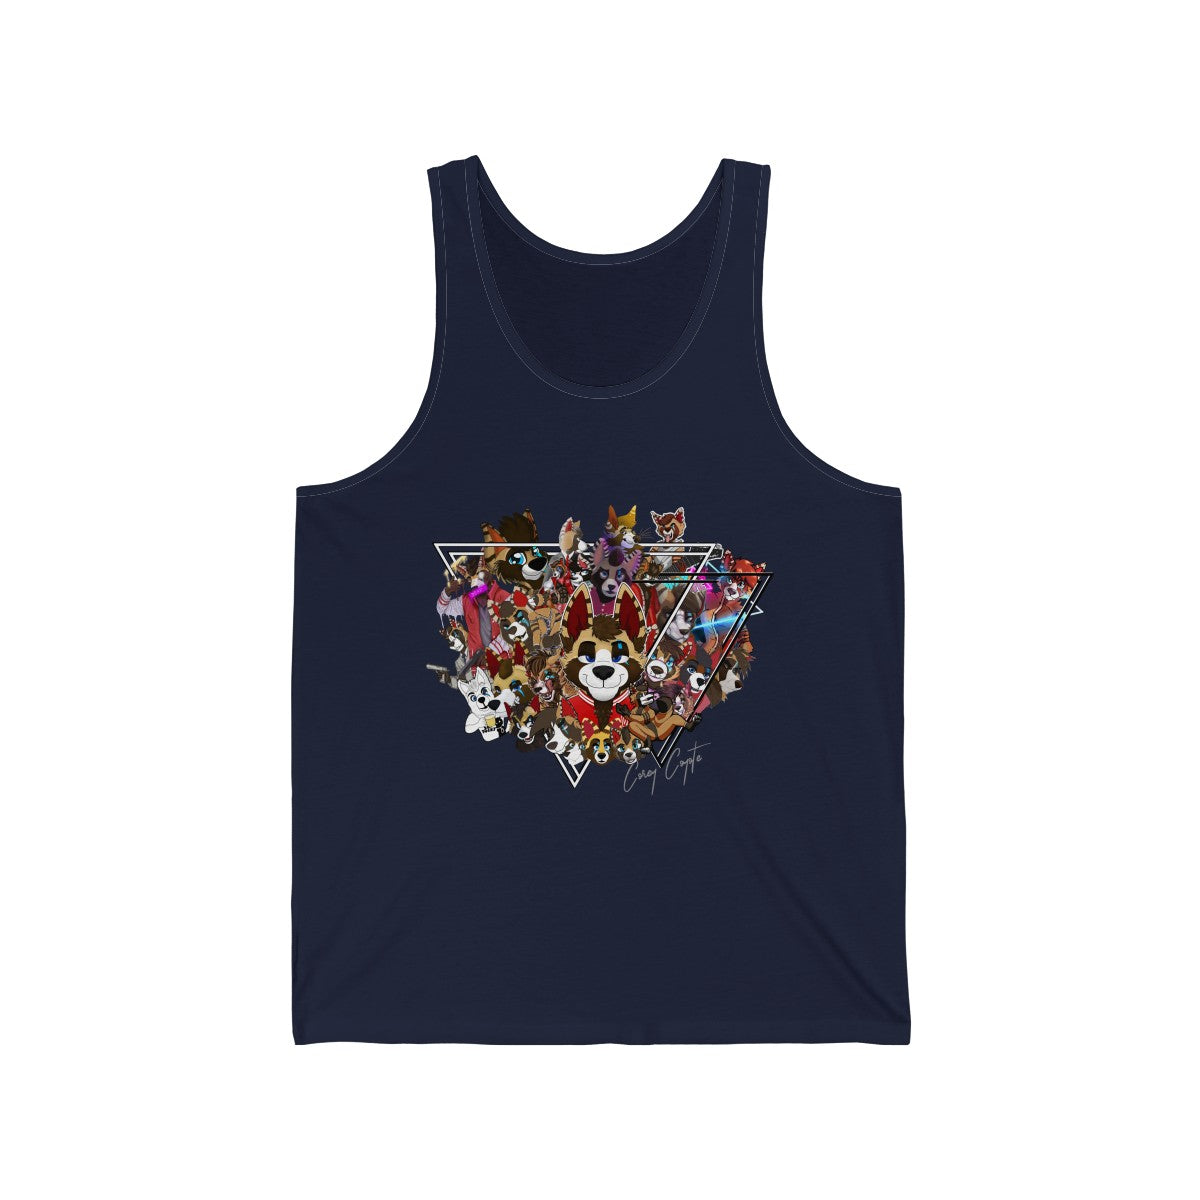 For The Fans - Tank Top Tank Top Corey Coyote Navy Blue XS 